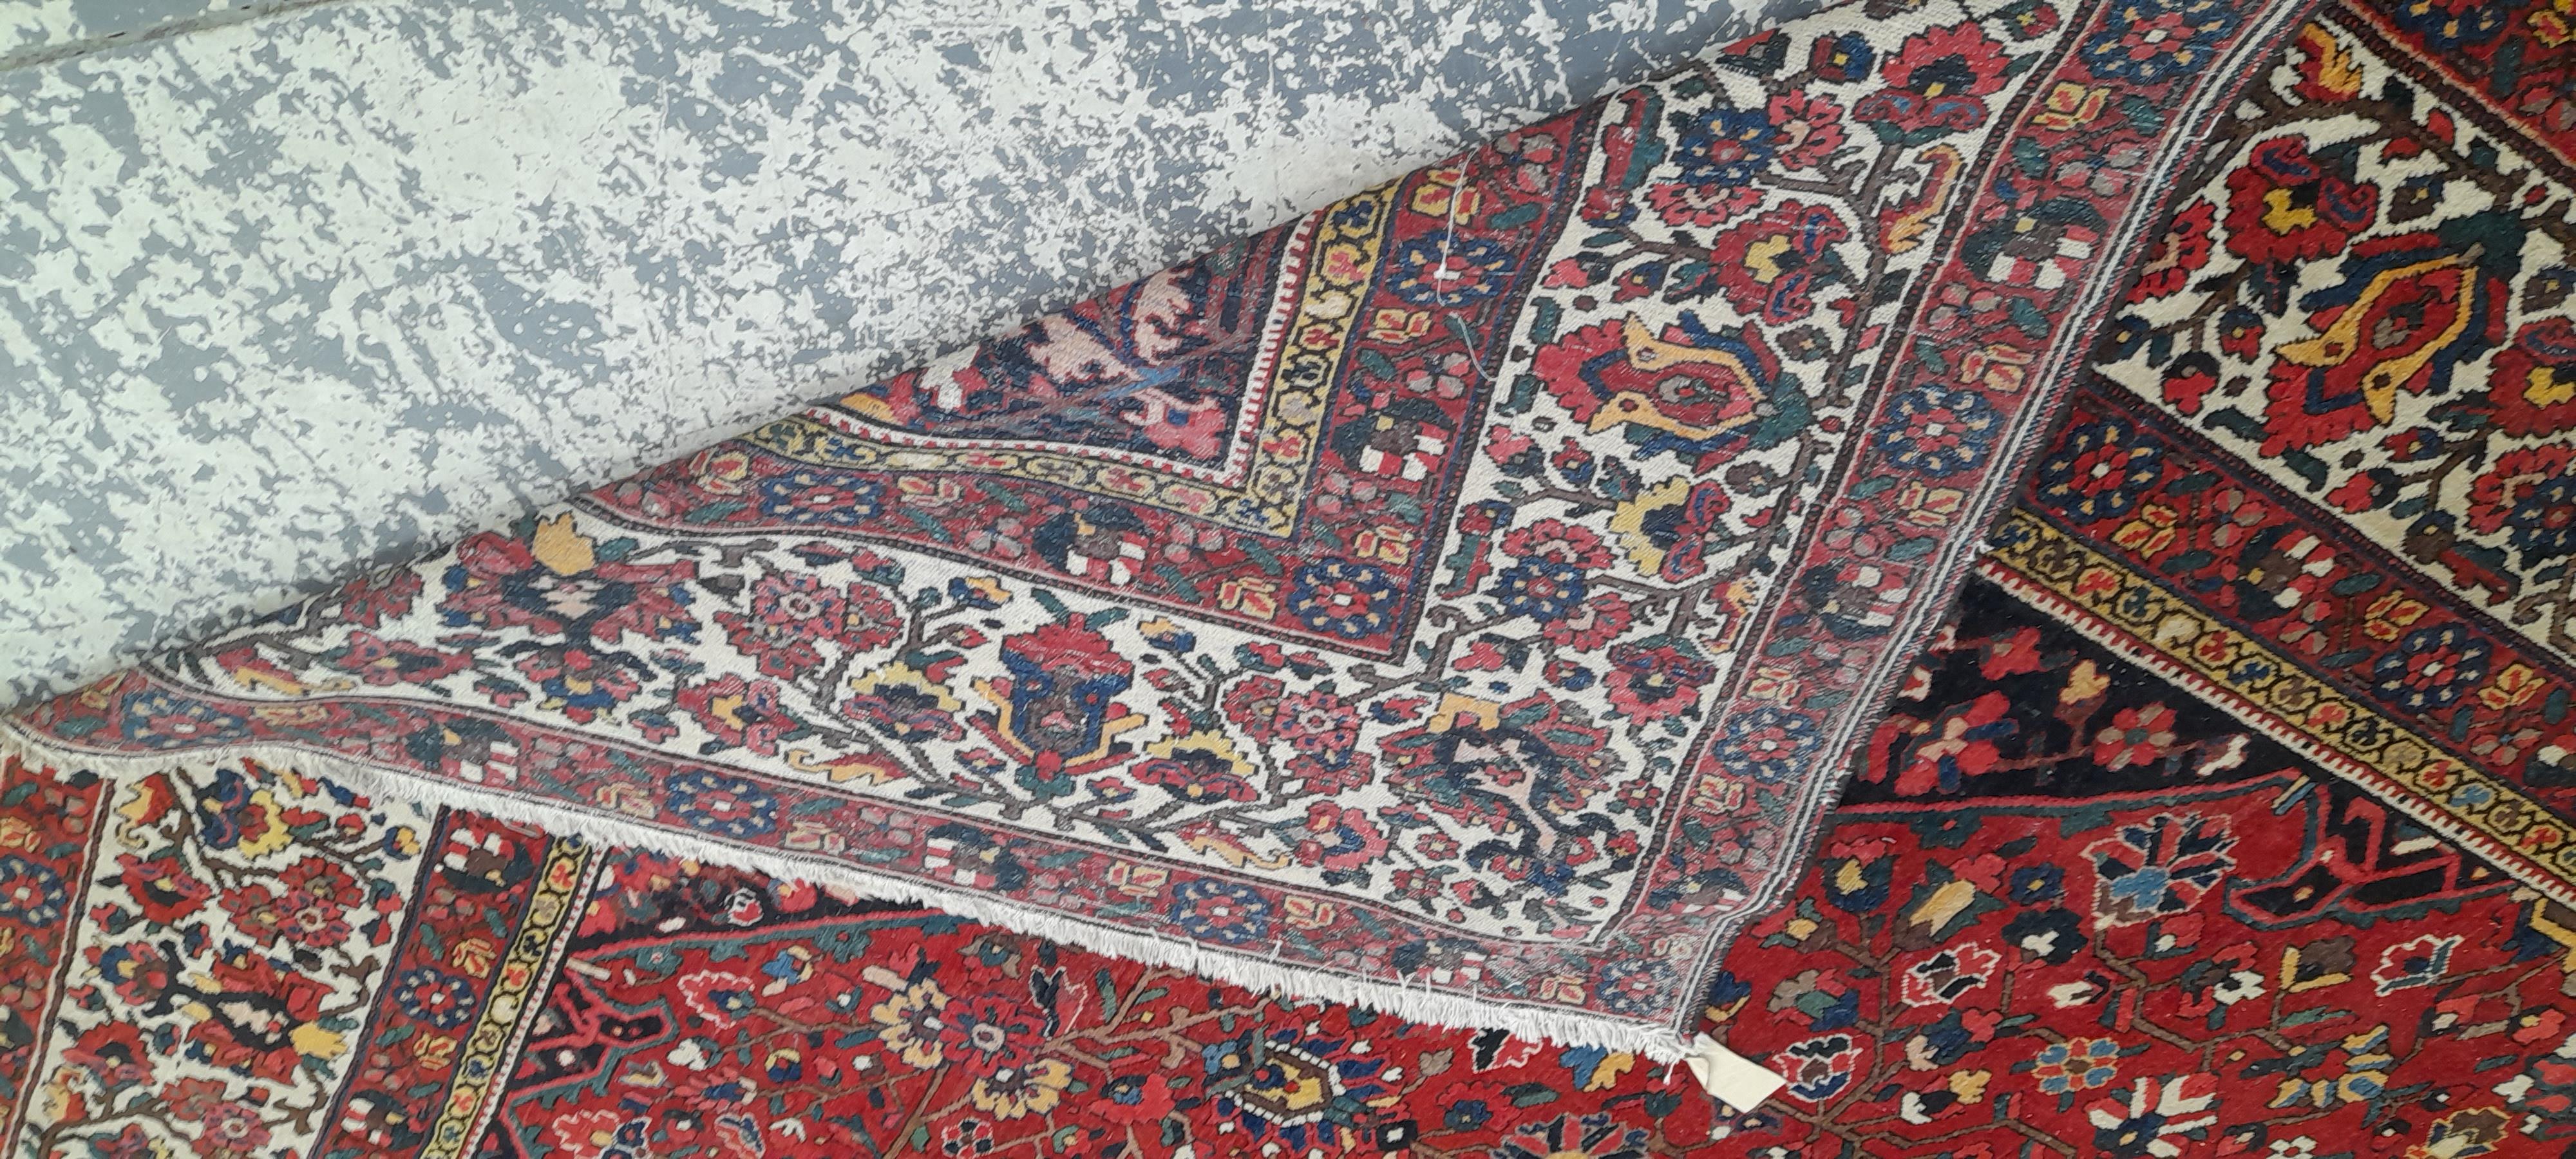 A COUNTRY HOUSE PERSIAN BAHKTIARI CARPET. 560 x 396cms - Image 8 of 8